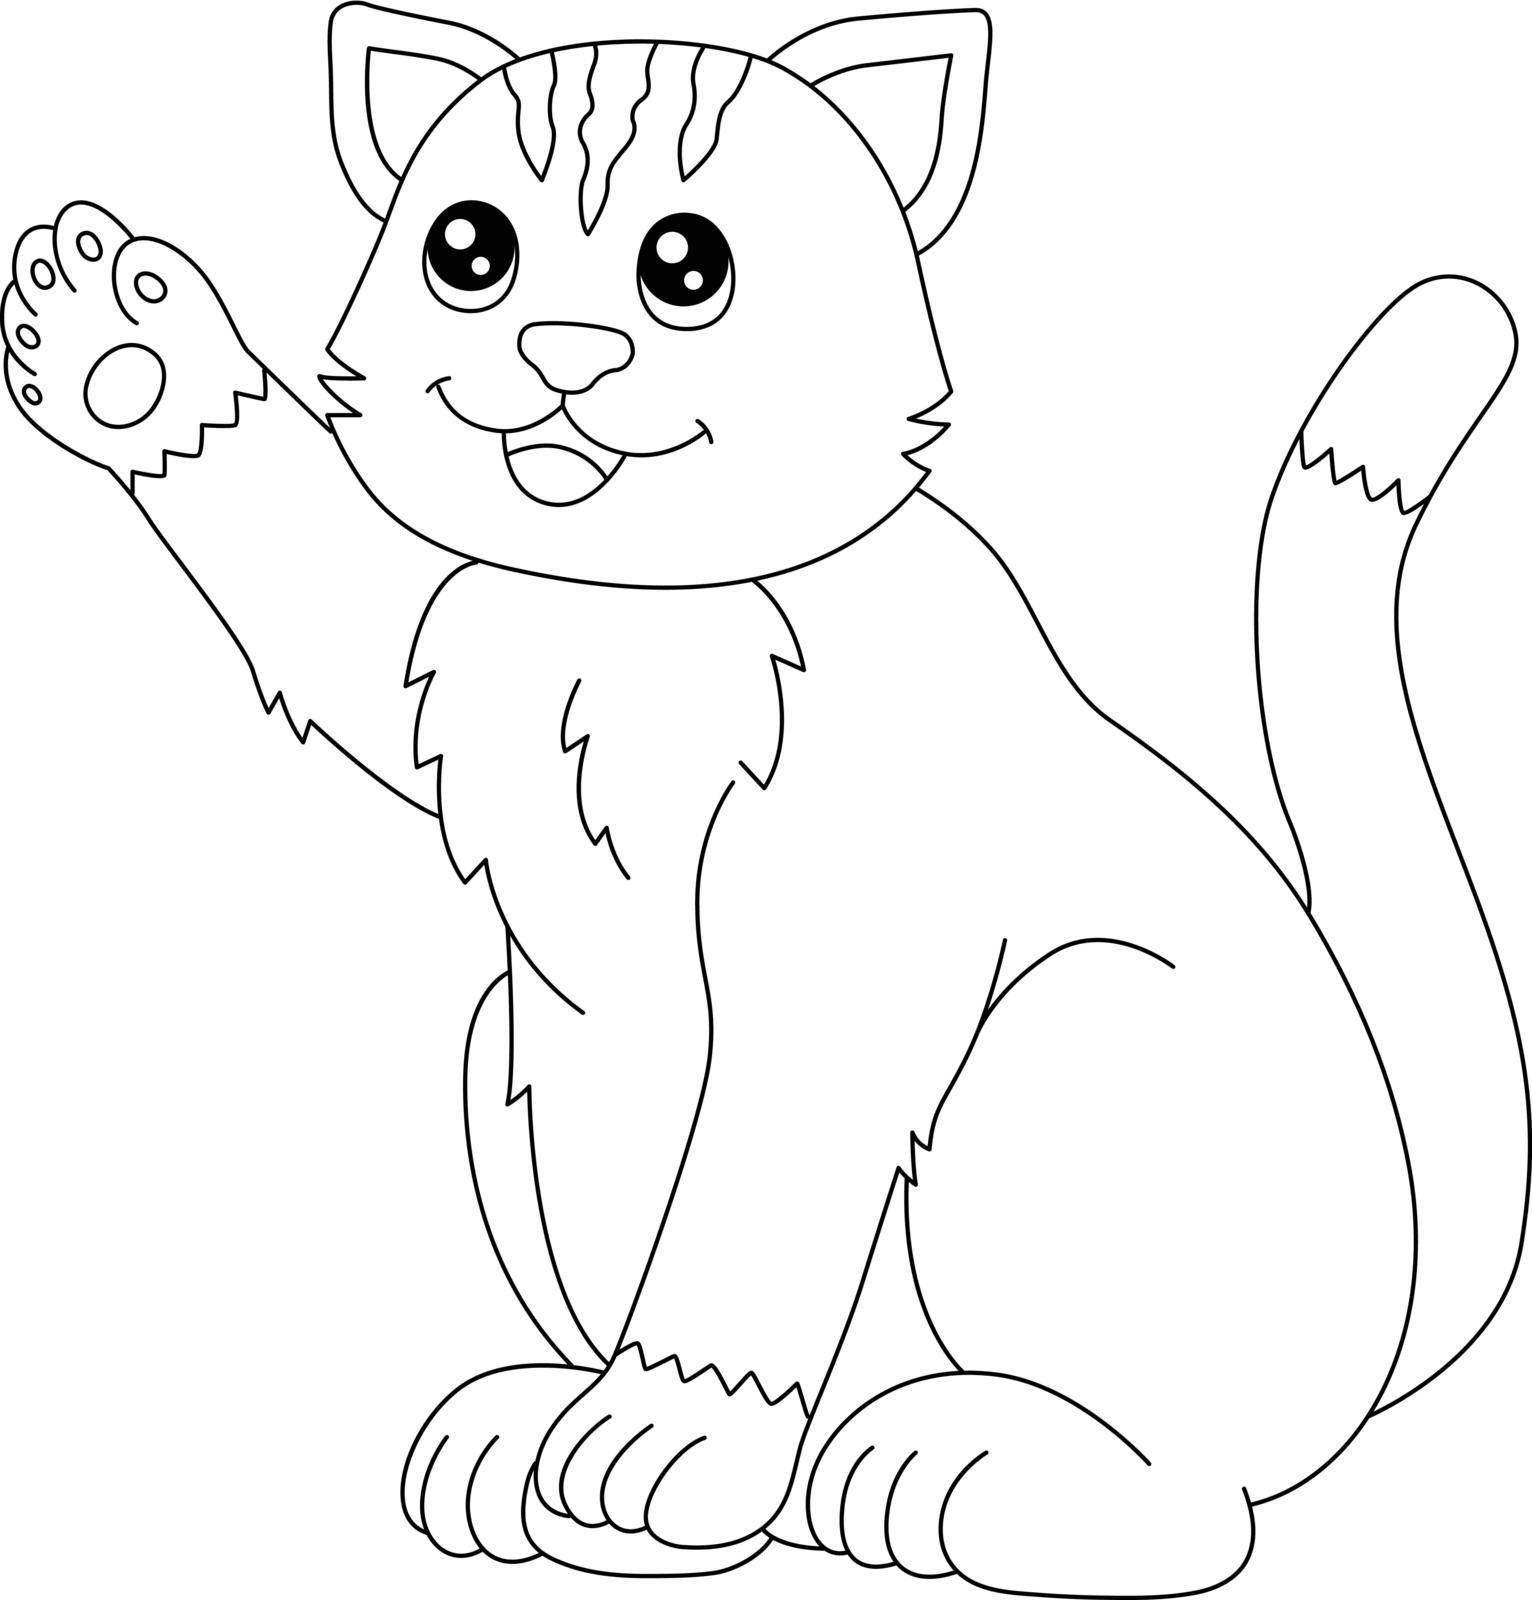 A cute and funny coloring page of a cat. Provides hours of coloring fun for children. To color, this page is very easy. Suitable for little kids and toddlers.